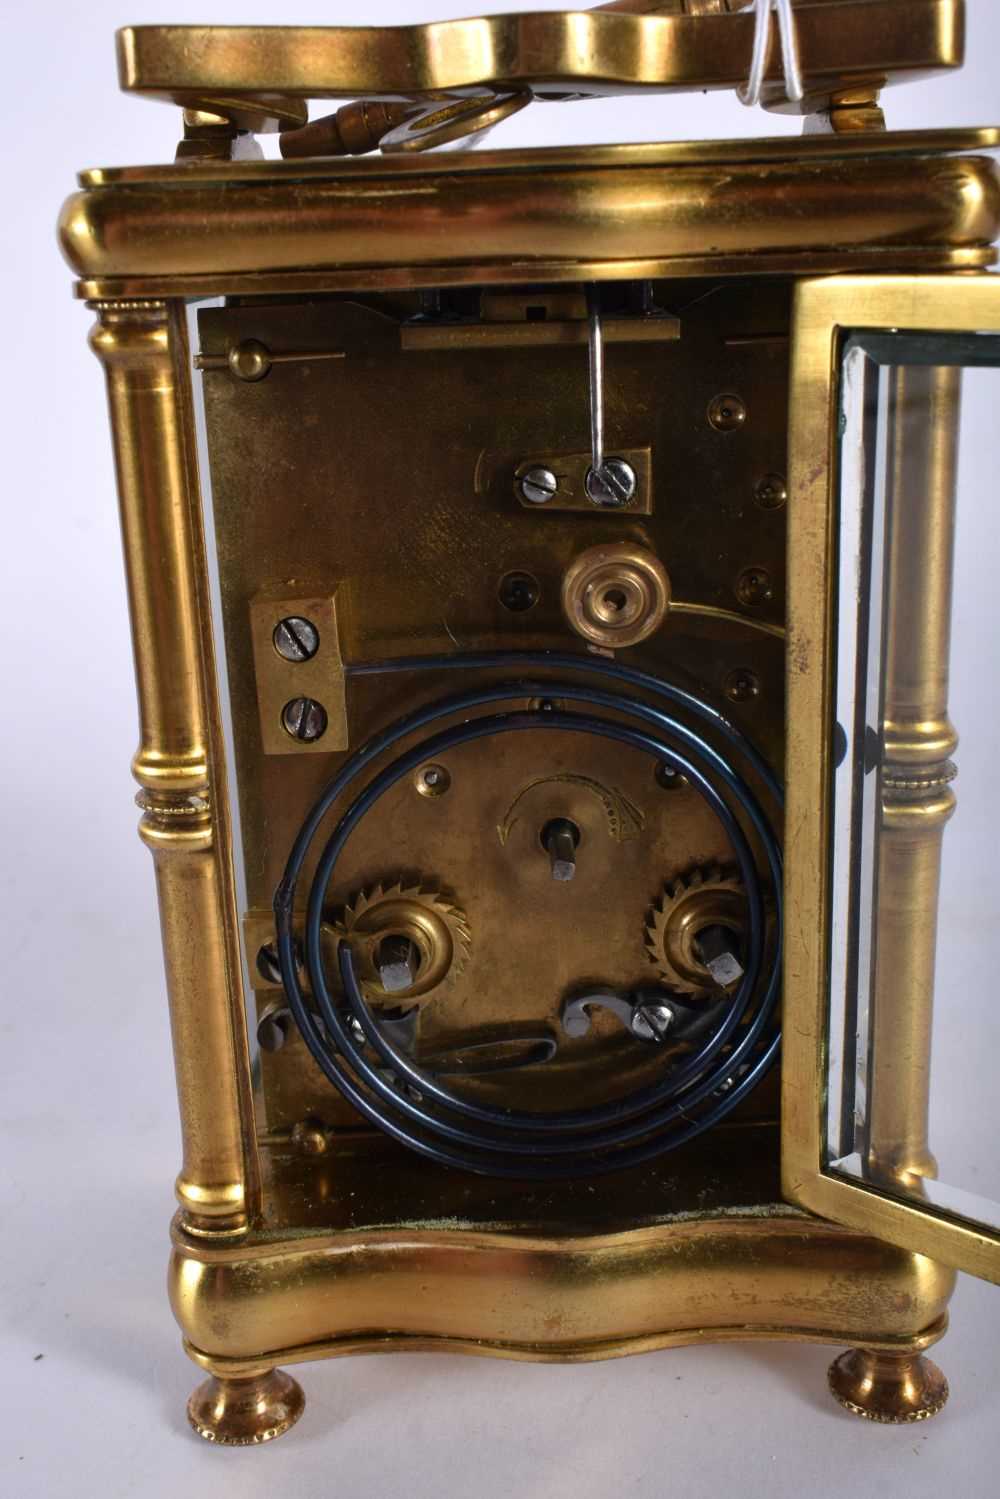 A CASED ANTIQUE BRASS CARRIAGE CLOCK. 14.5 cm high inc handle. - Image 4 of 7